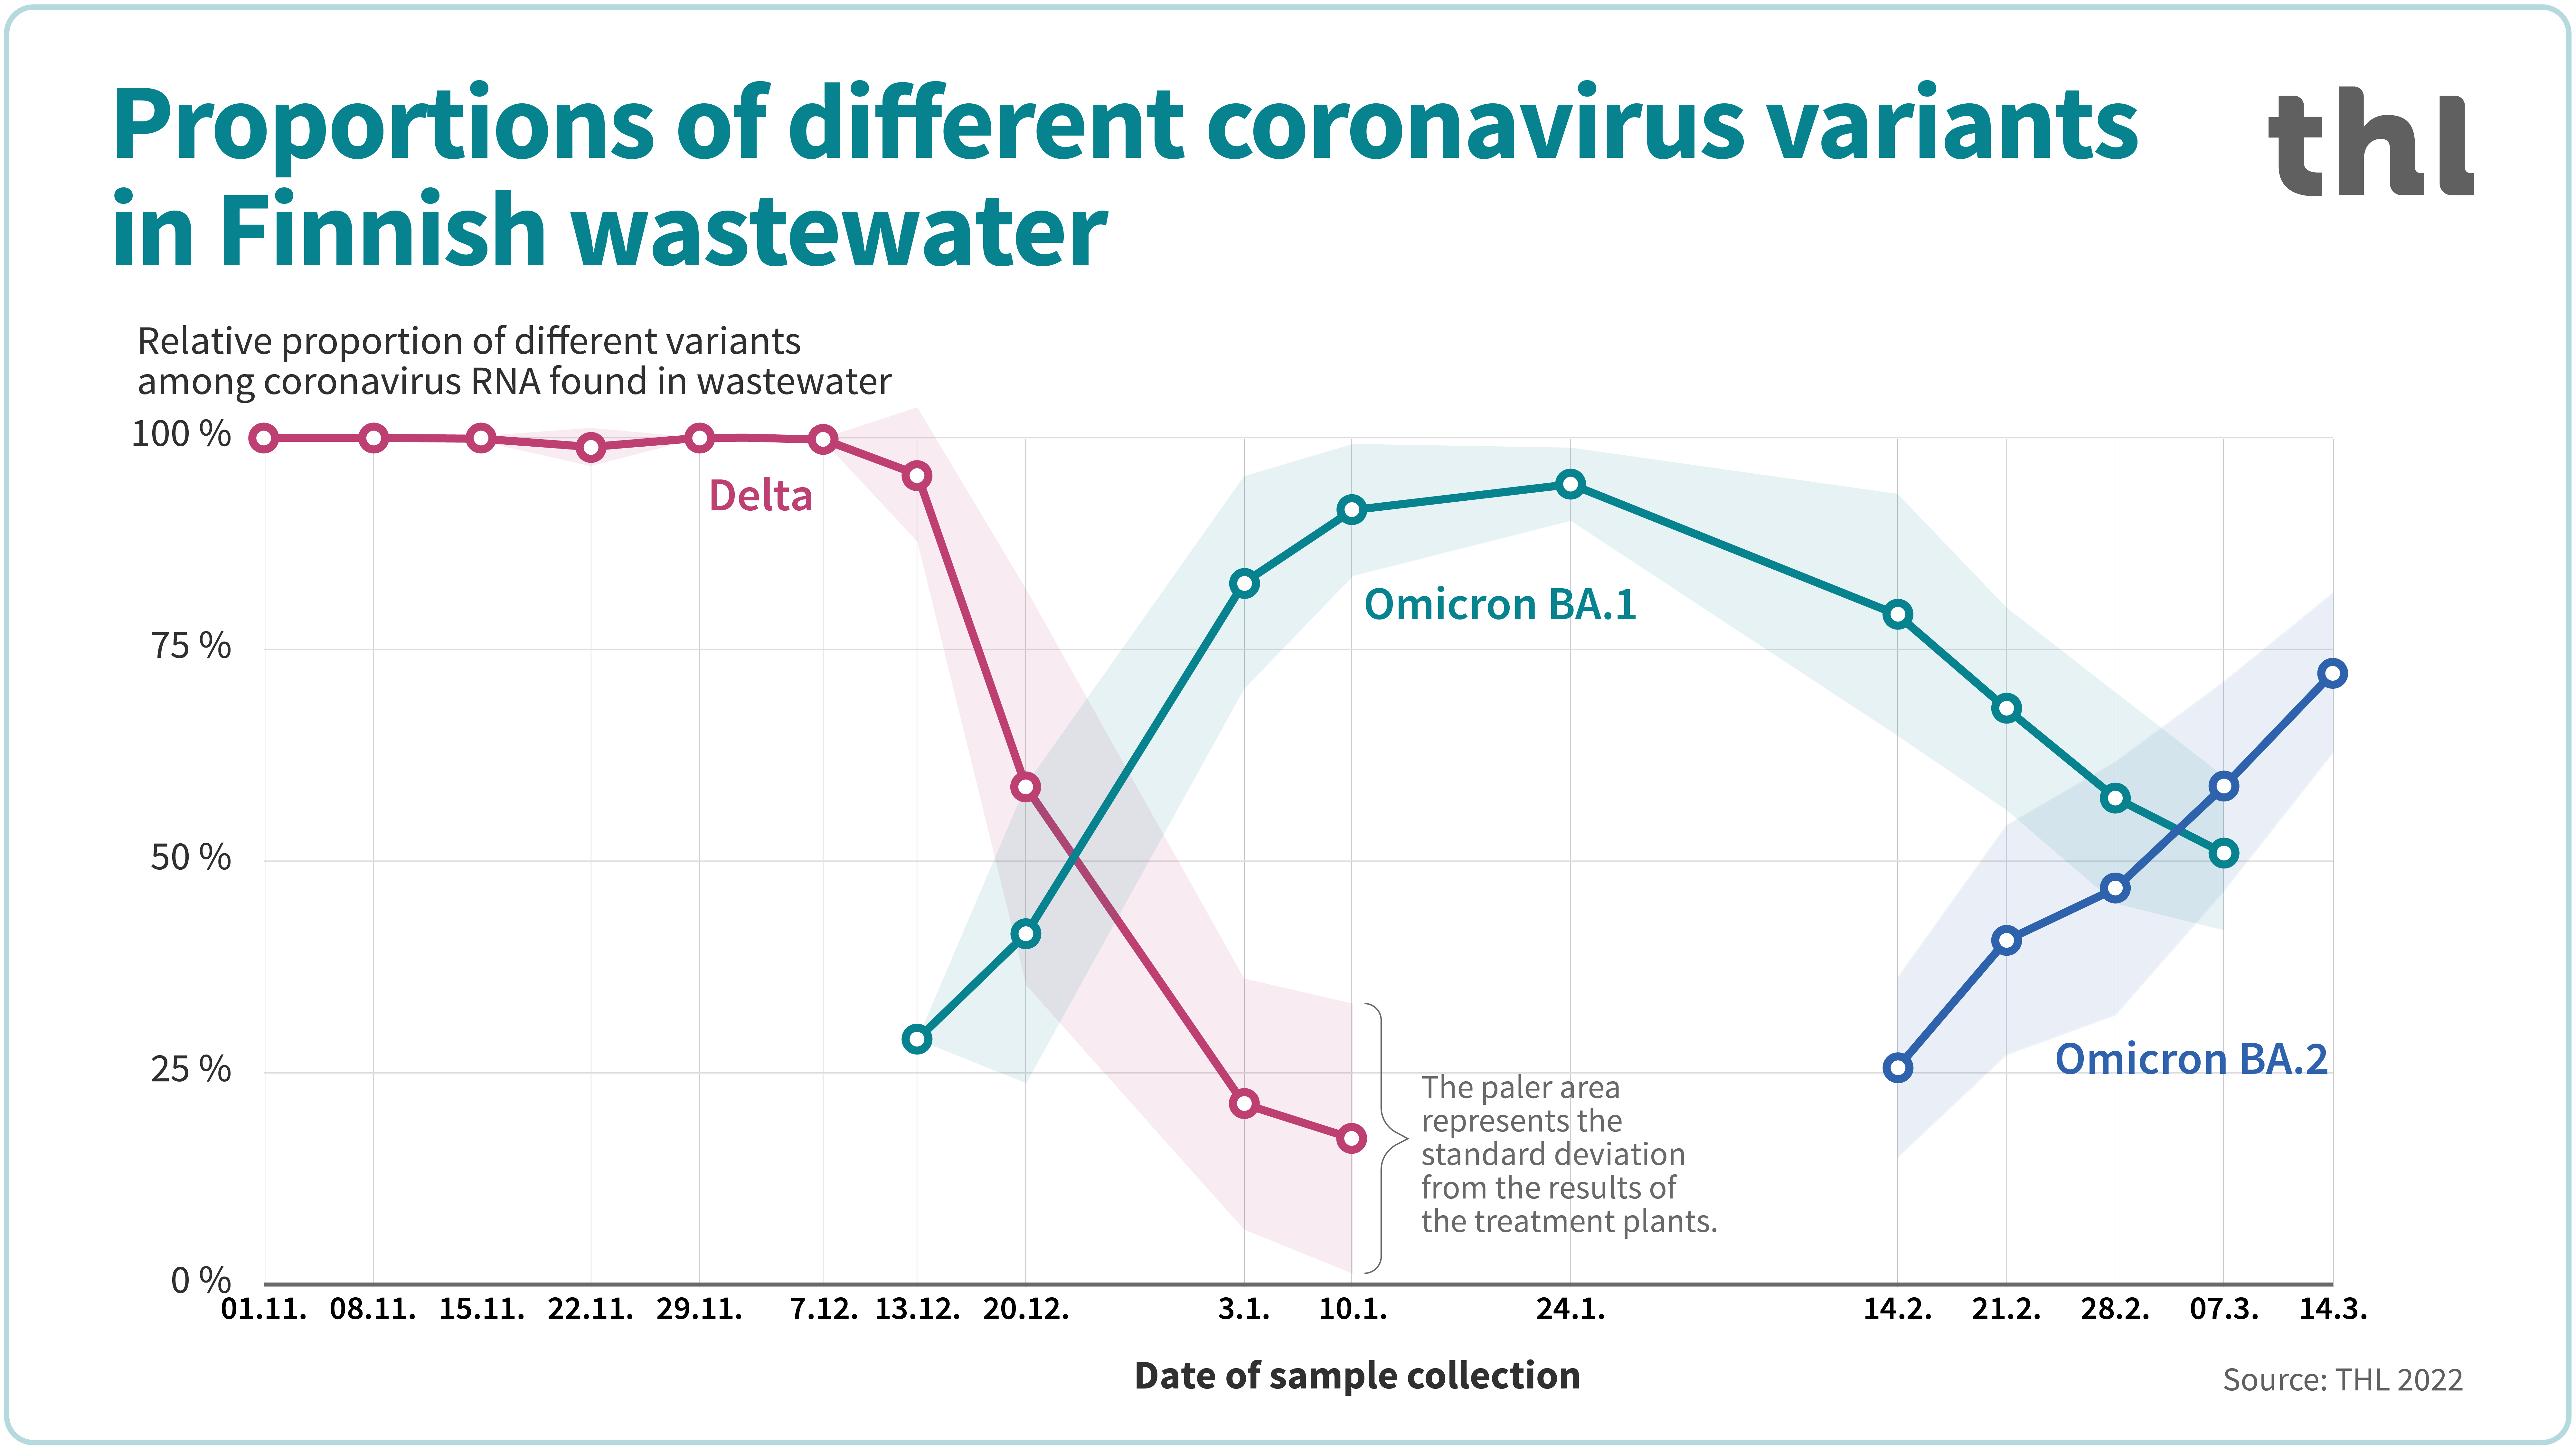 The Delta variant was most common until mid-December. In early January the Omicron BA.1 variant became the most common coronavirus variant in Finnish wastewater, and in mid-March the Omicron BA.2 sub-variant overtook the BA.1 sub-variant.